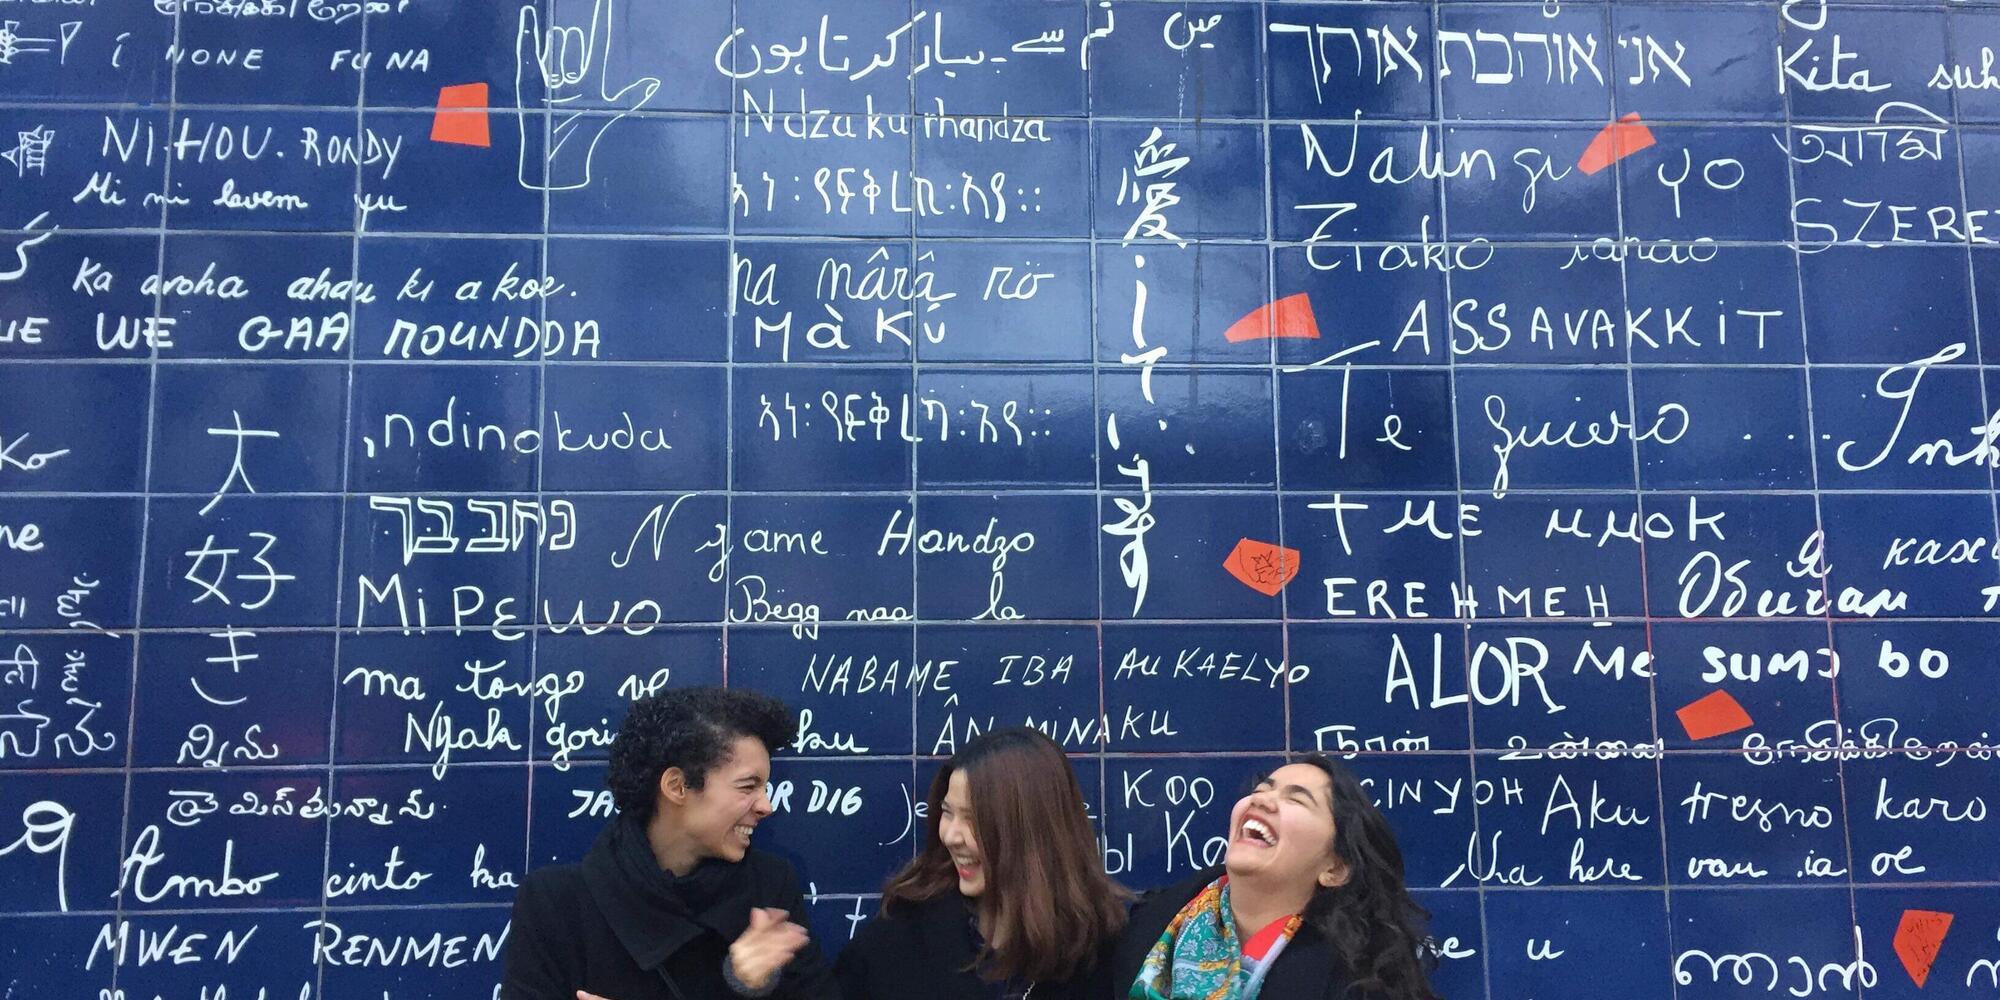 Group of students laughing in front of mural in Paris